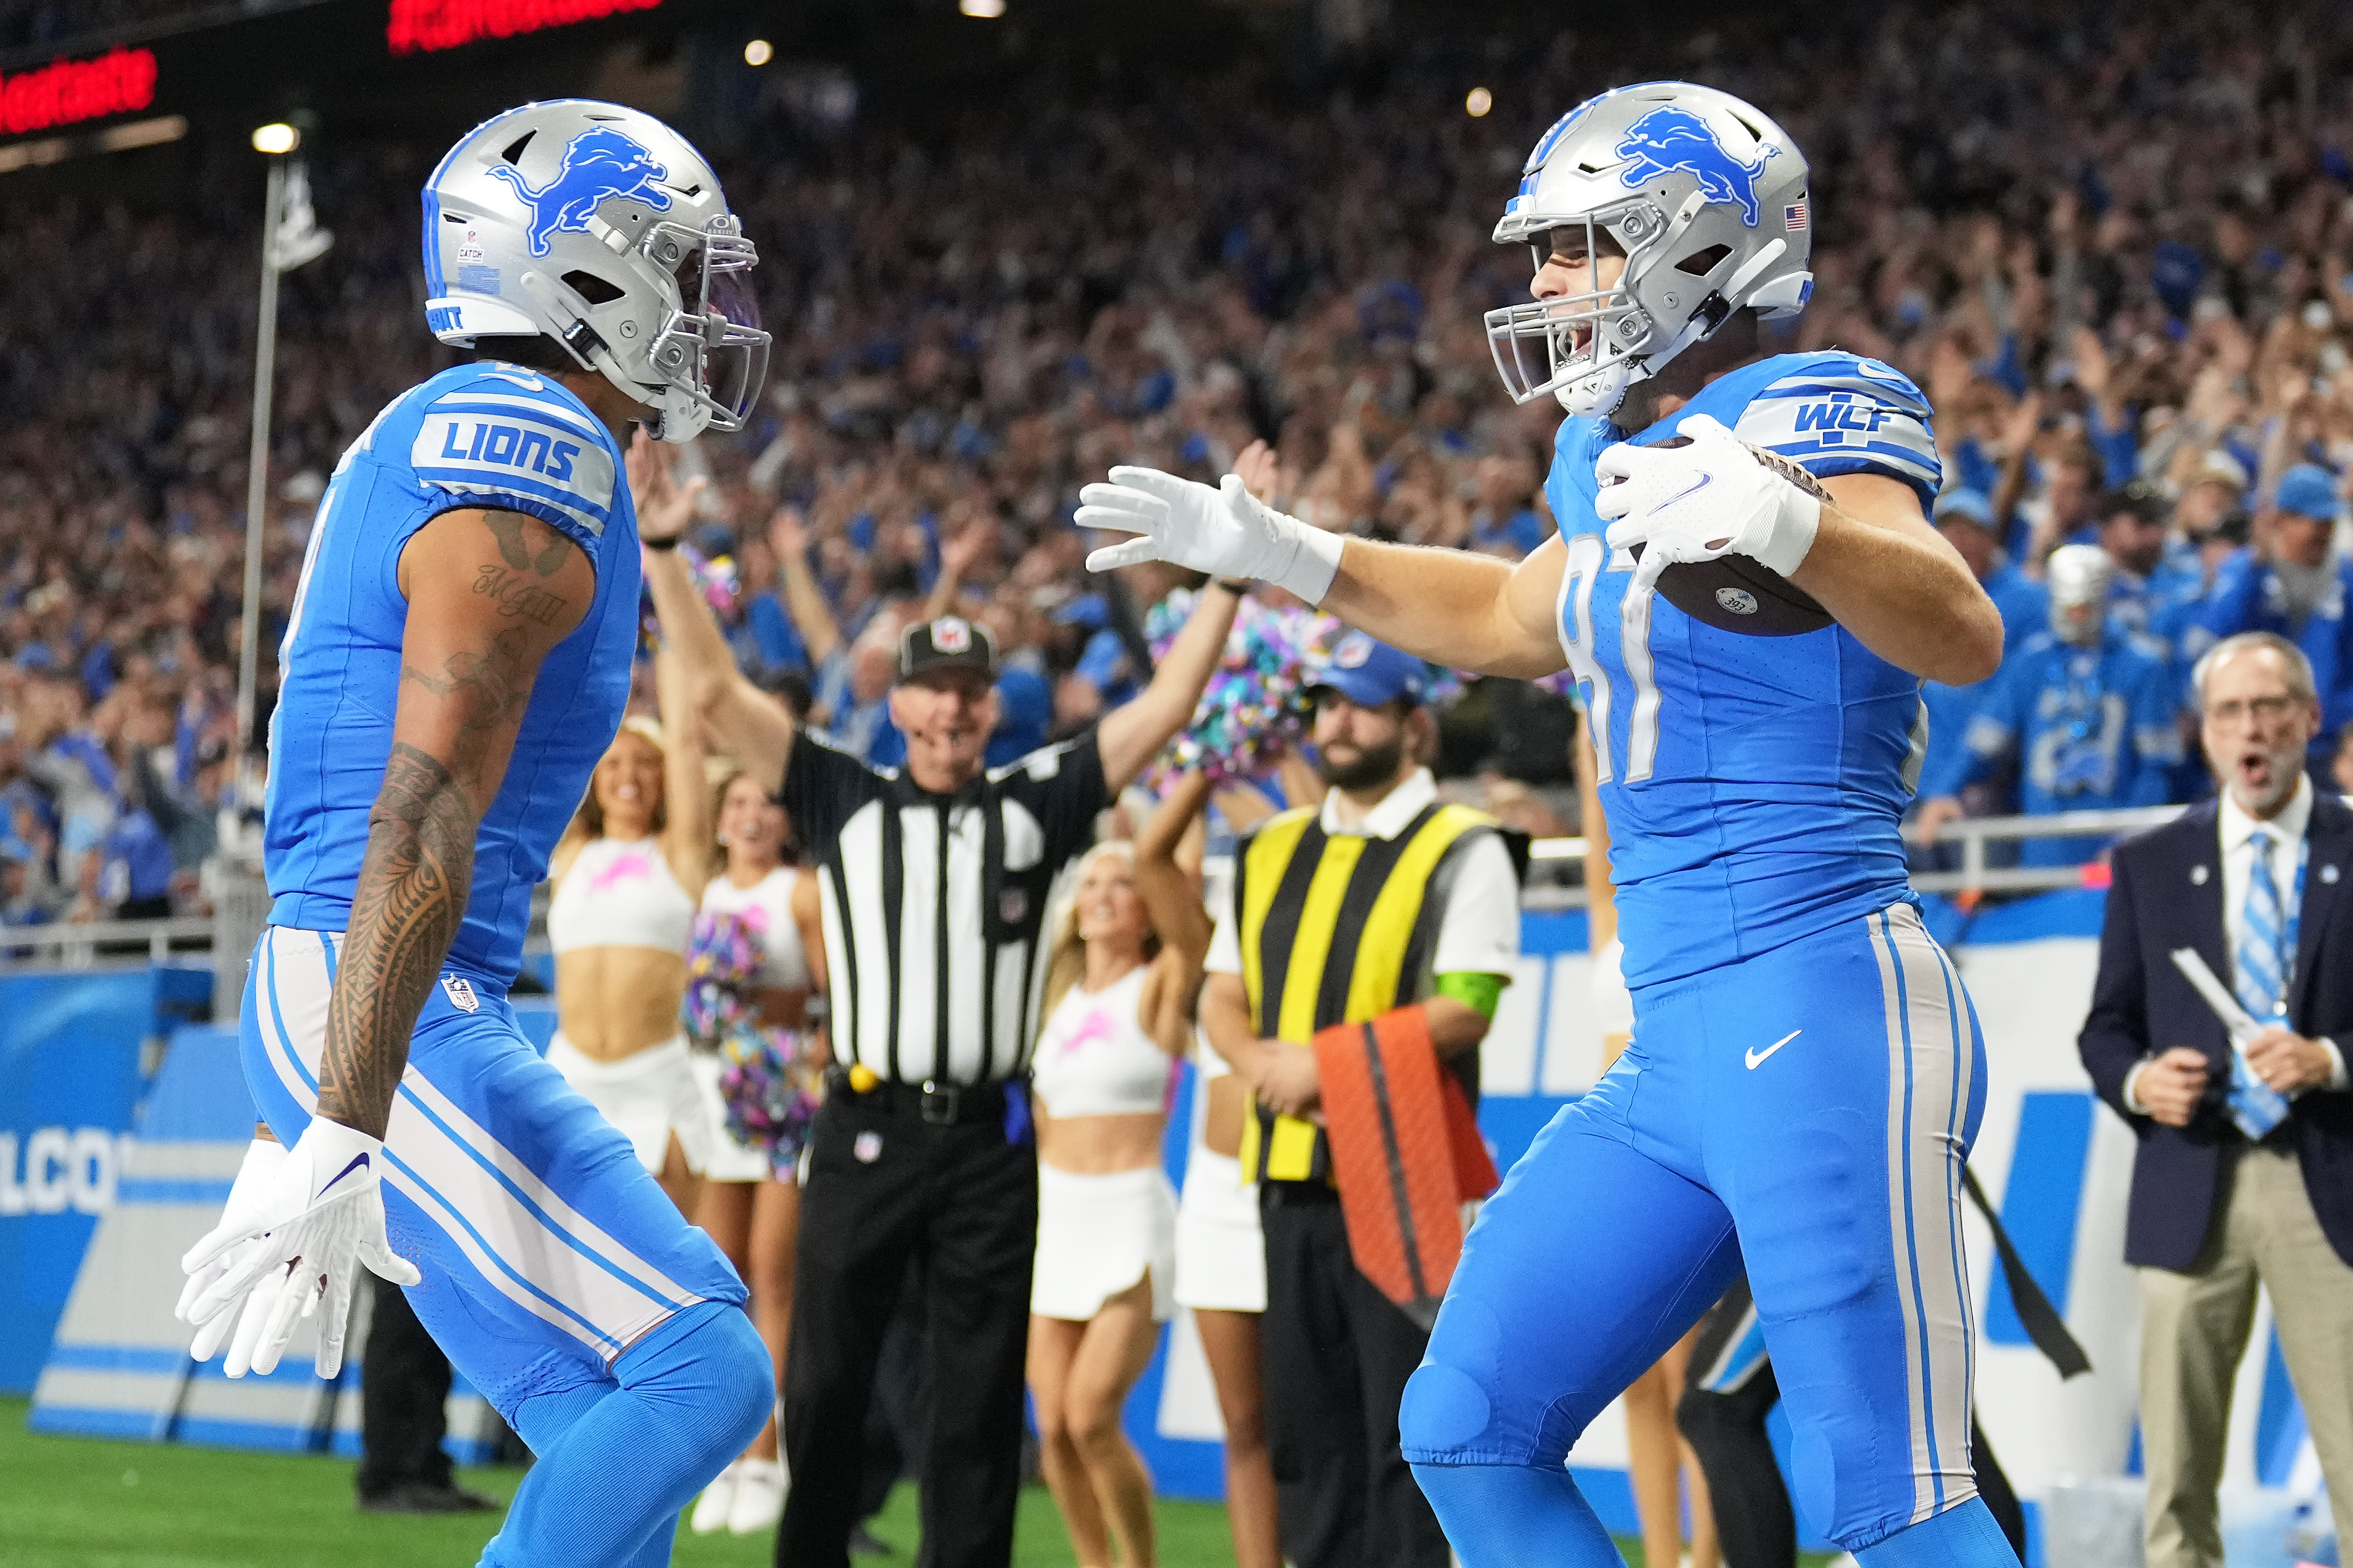 Lions vs. Packers winners and losers, highlights, score, top plays